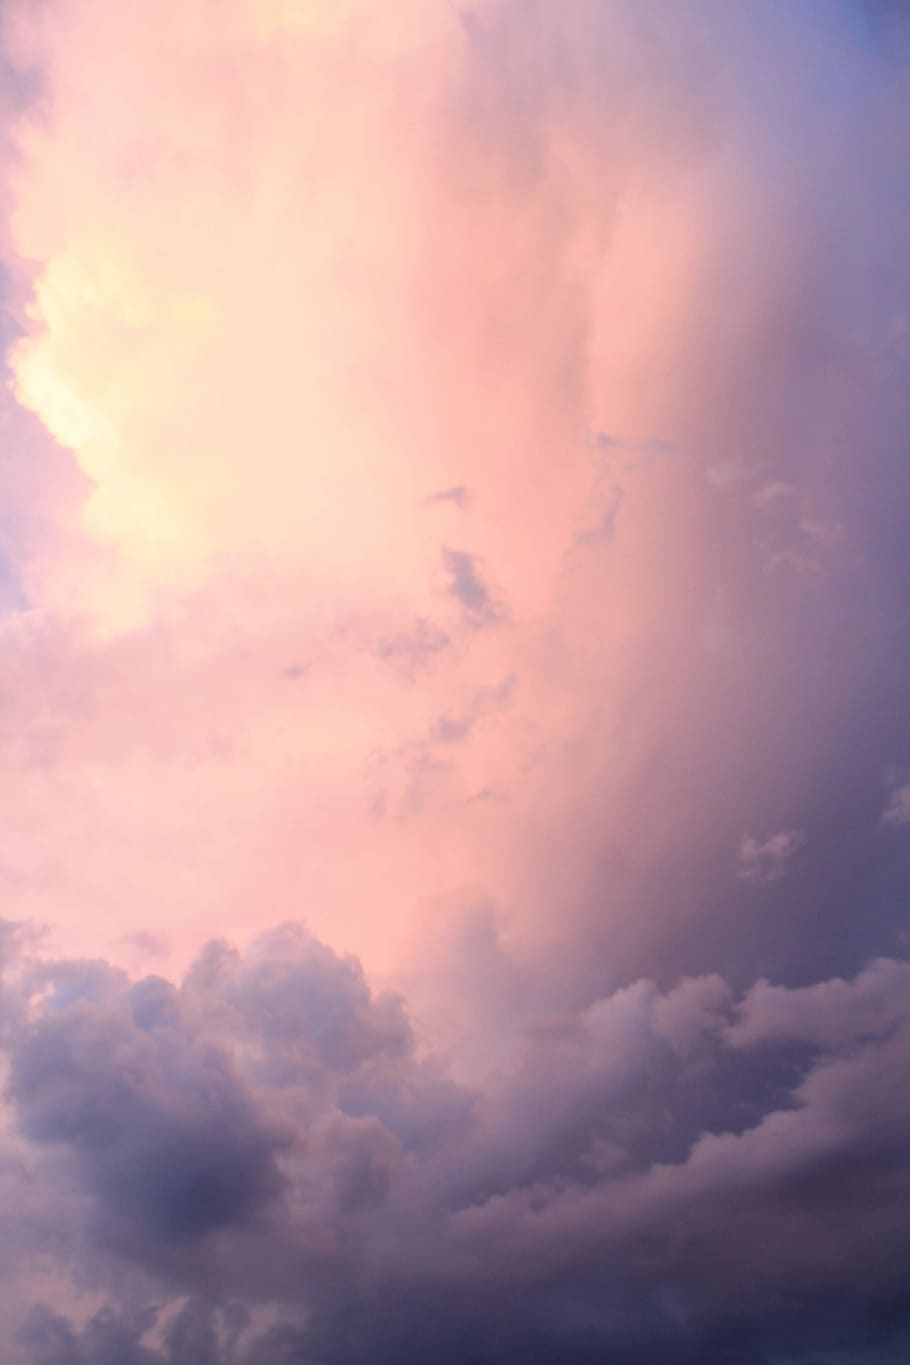 White Clouds During Daytime Gray And Pink Clouds Cloud Wallpaper Iphone Xs 910x1365 Wallpaper Teahub Io